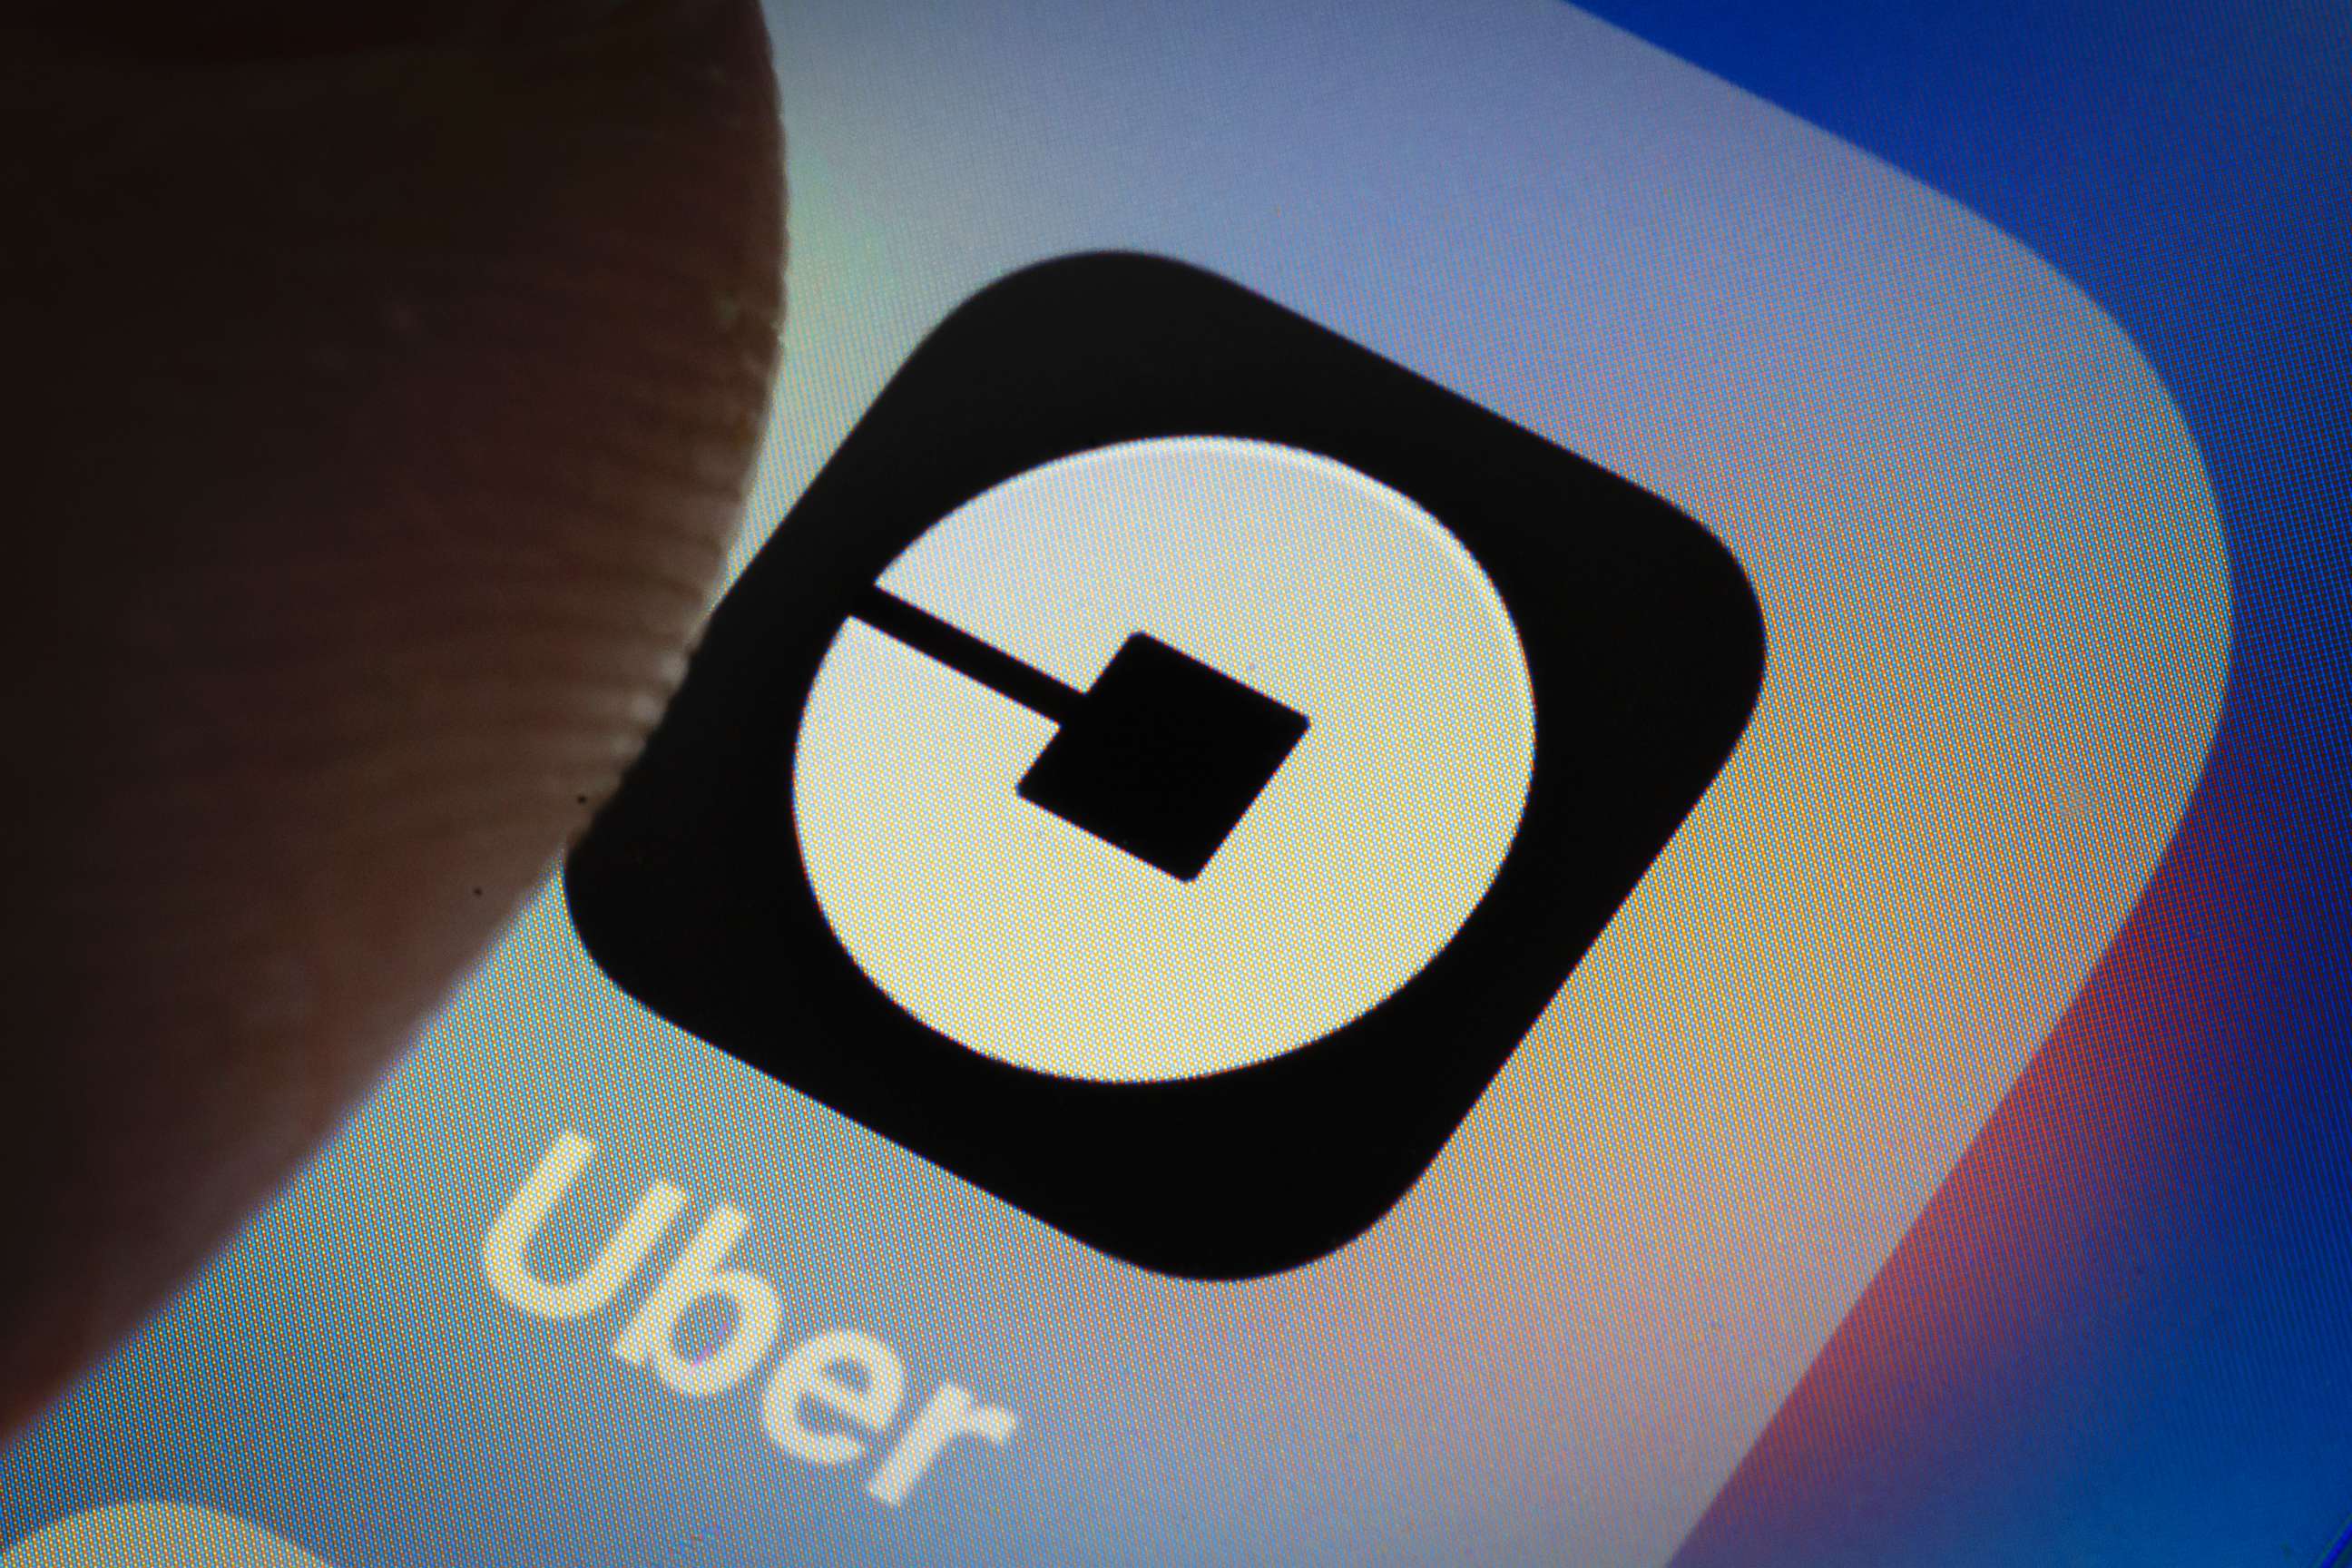 PHOTO: The Uber app logo is displayed on a smartphone on March 20, 2018 in Berlin.